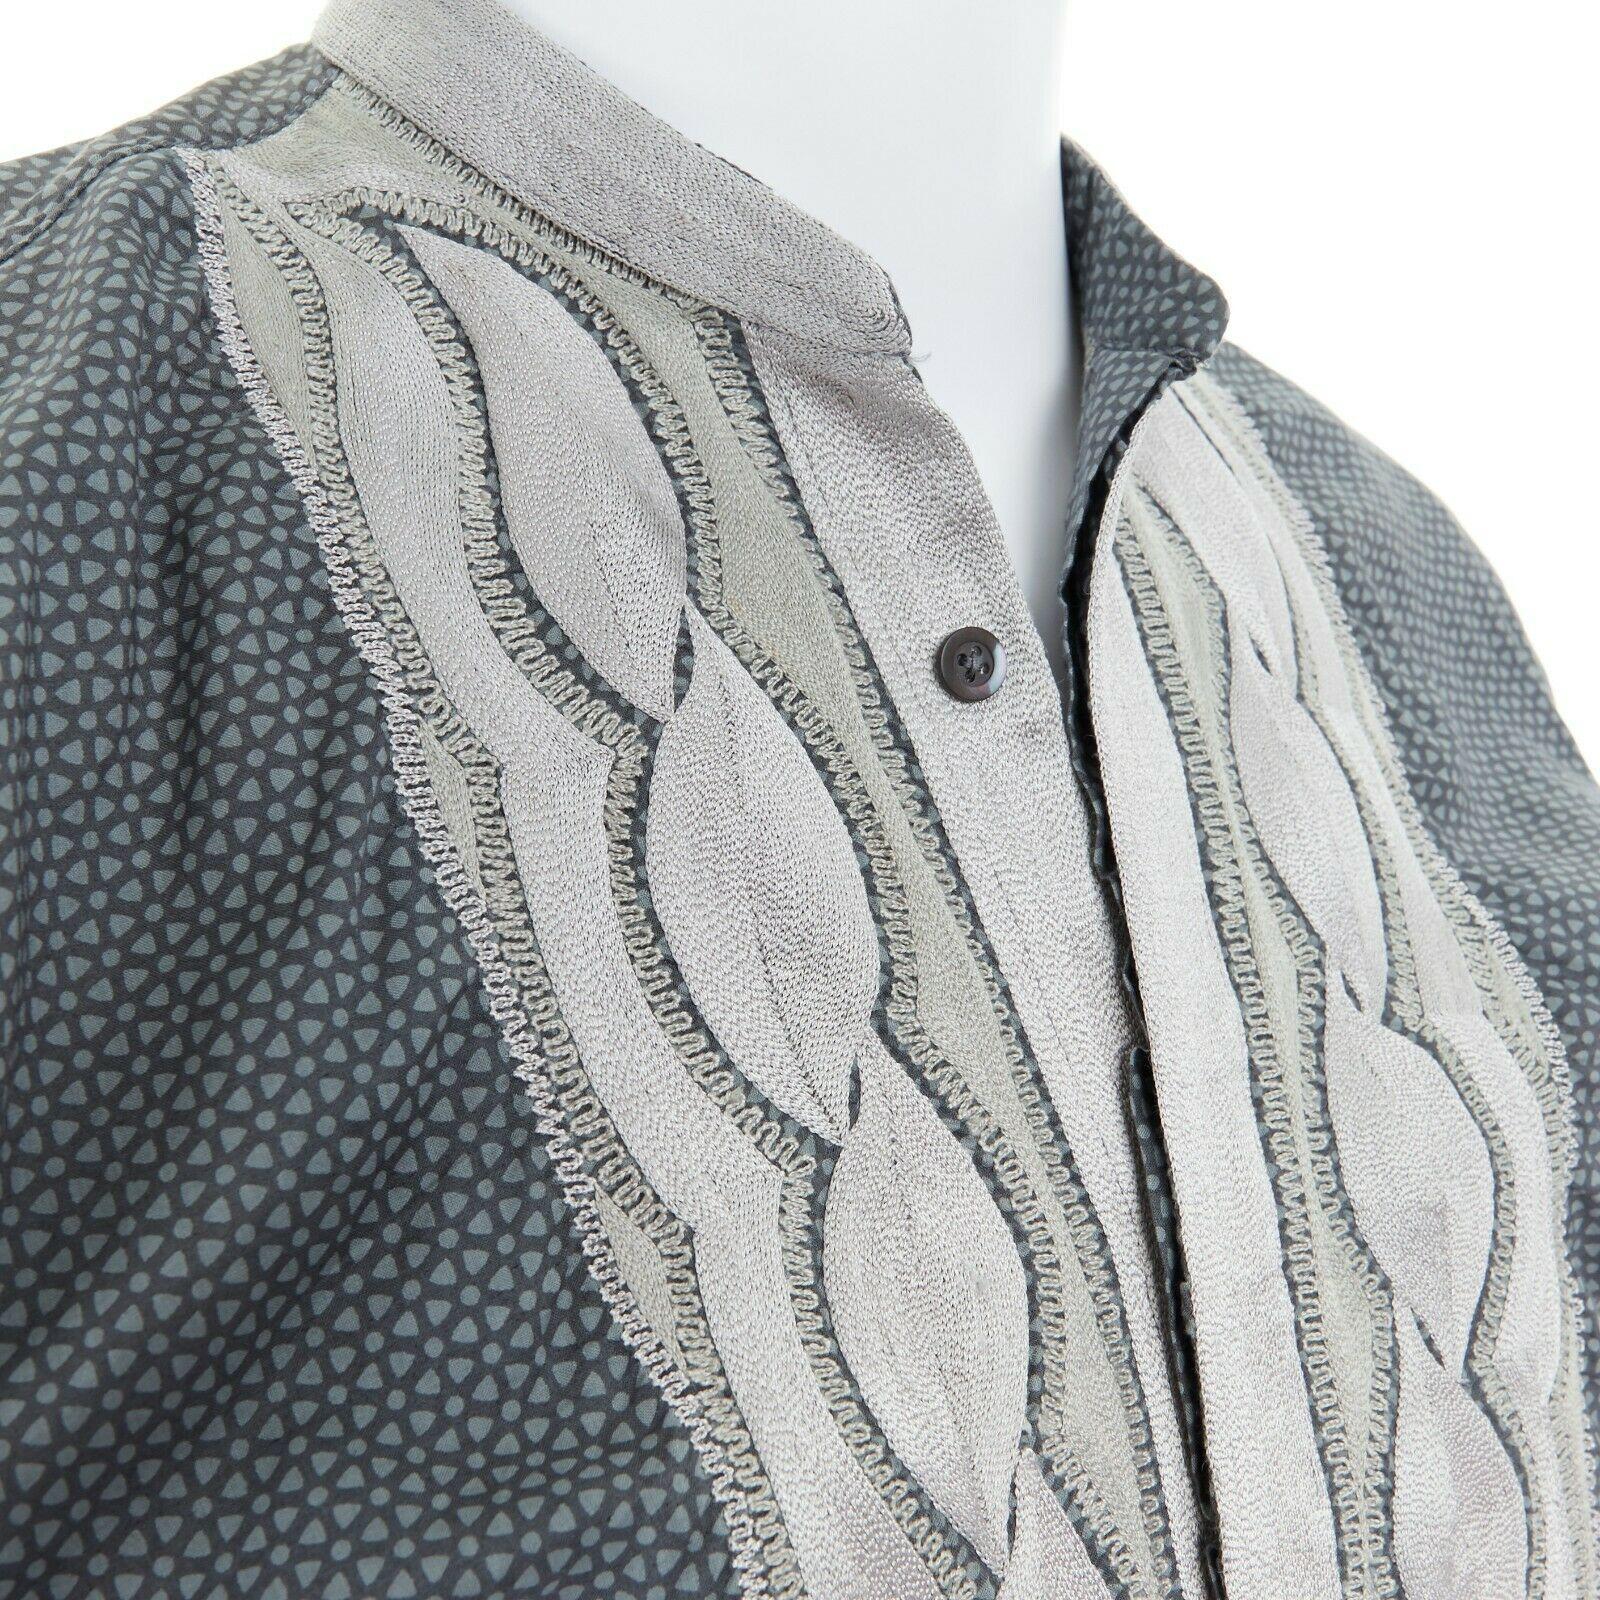 DRIES VAN NOTEN green geometric print embroidered bib tail back ethnic shirt M

DRIES VAN NOTEN
100% cotton. Green geometric
ethnic print. Collarless. Silver and green traditional embroidery bib detail at collar. Long sleeves. Single button standard